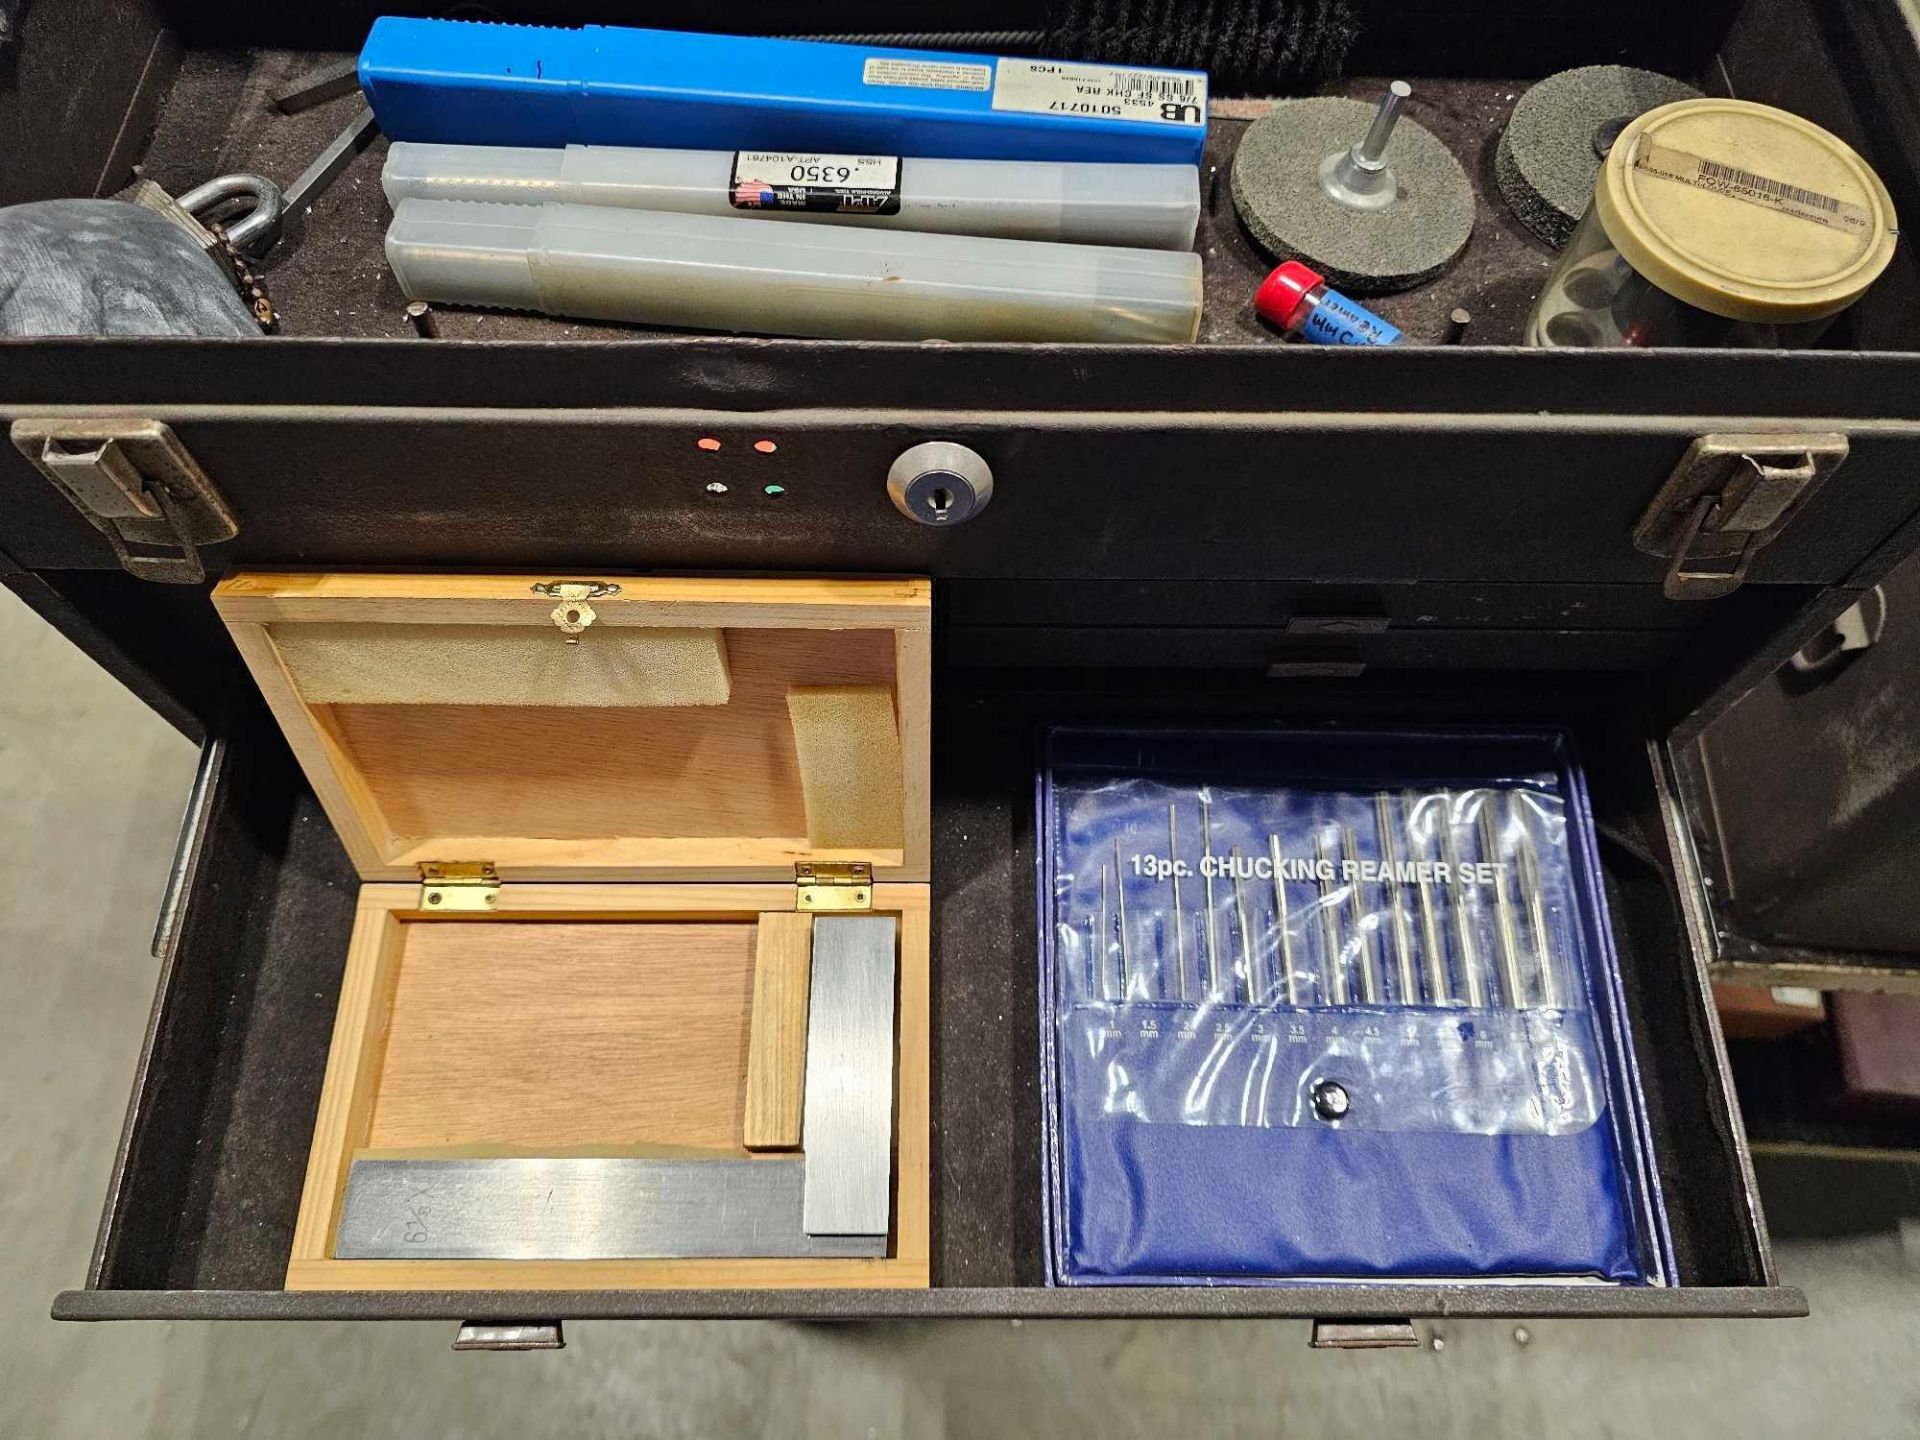 KENNEDY TOOL BOXES LOADED WITH MACHINISTS TOOLS AND MEASURING DEVICES - Image 41 of 45